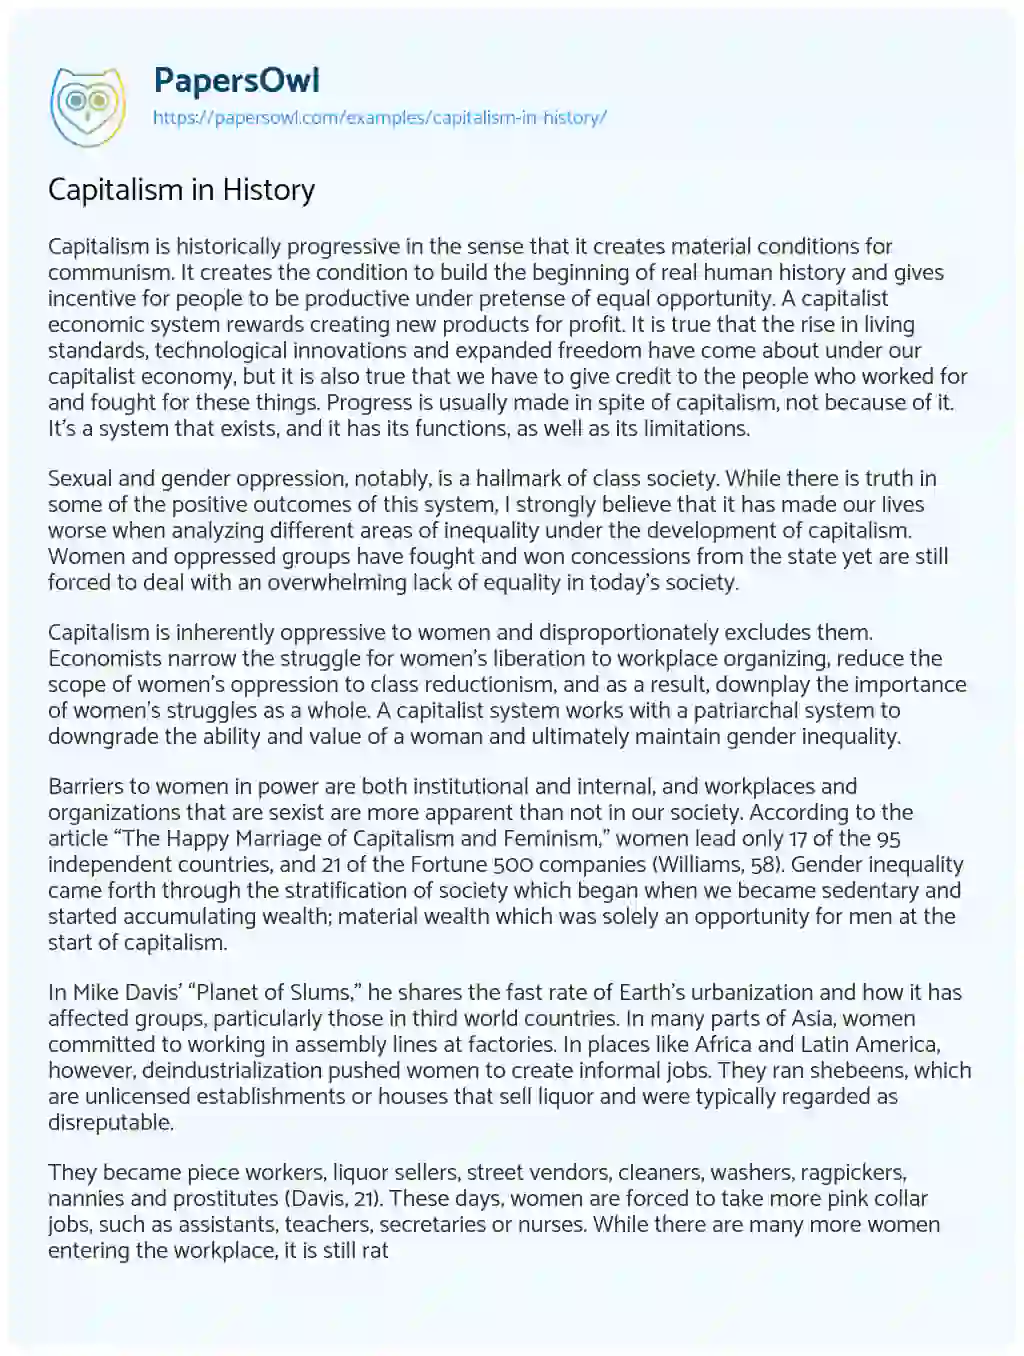 Capitalism in History essay